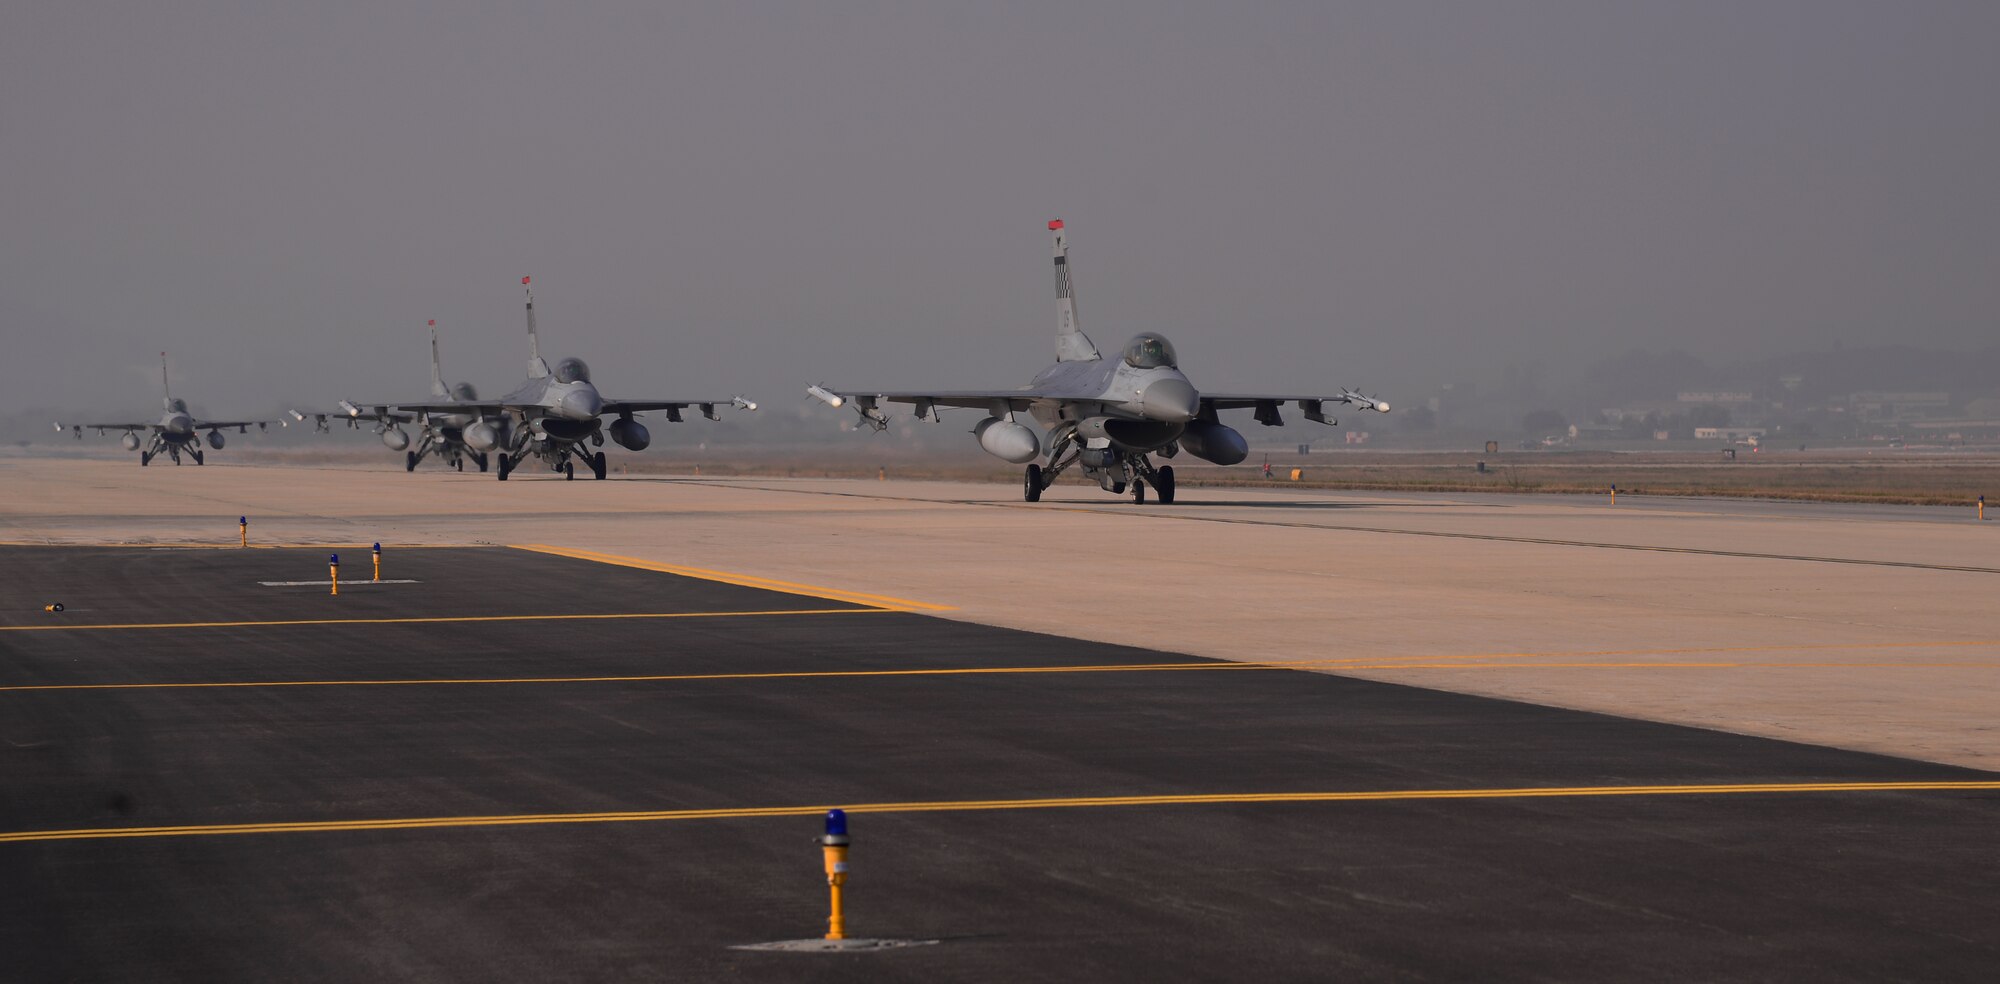 F-16 Fighting Falcons assigned to the 36th Fighter Squadron taxi along the runway Nov. 3, 2015, at Osan Air Base, South Korea. Airfield managers from the 51st Operations Support Squadron ensure the flightline is operational for these aircraft while participating in readiness exercise Vigilant Ace 16, a large-scale exercise designed to test the combat capabilities and enhance the interoperability of the U.S. and South Korean air forces. (U.S. Air Force photo/Staff Sgt. Benjamin Sutton)